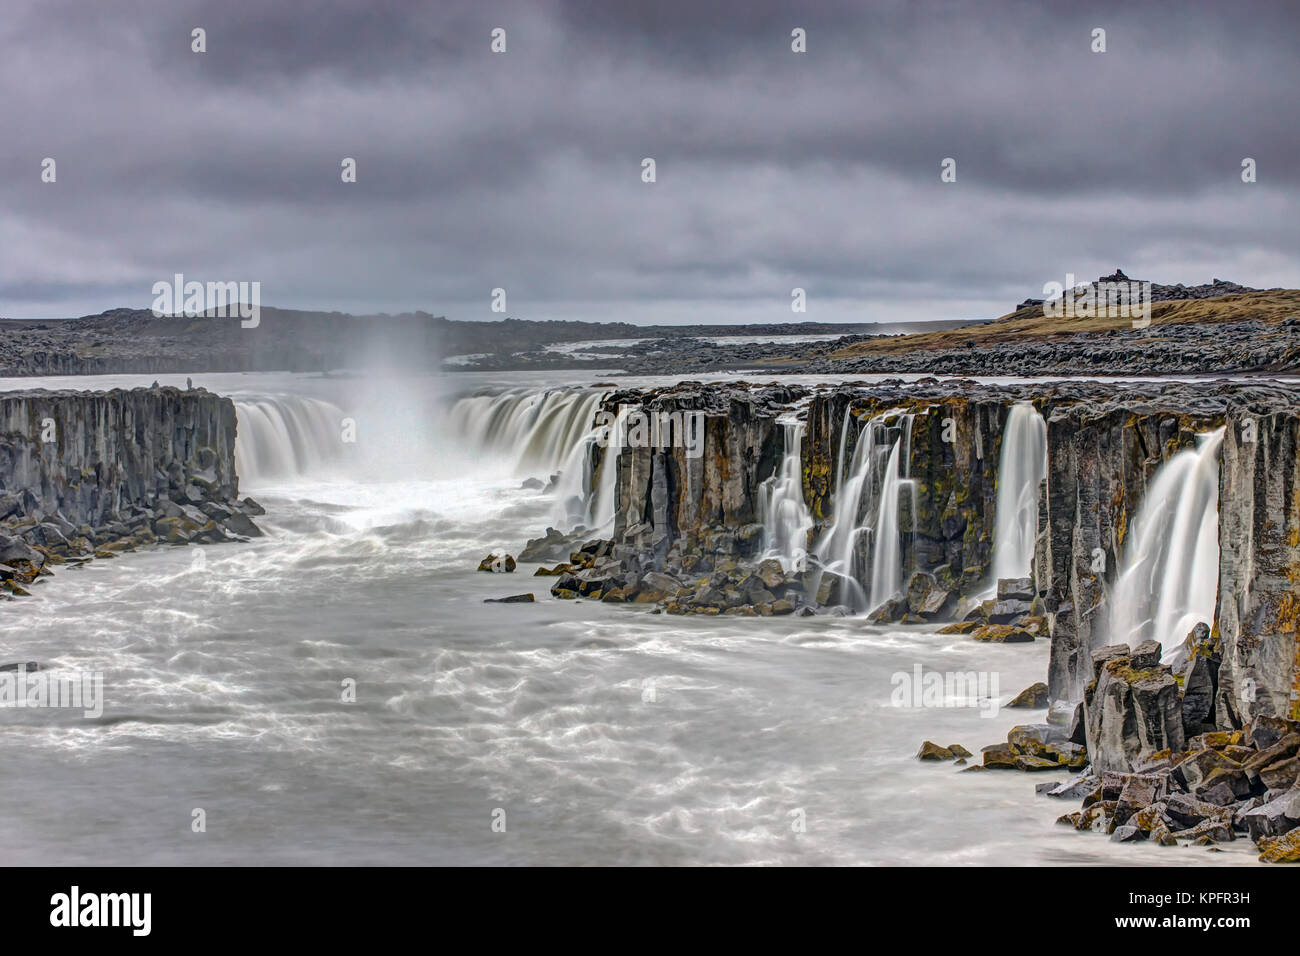 The mighty Selfoss waterfall in the north of Iceland Stock Photo